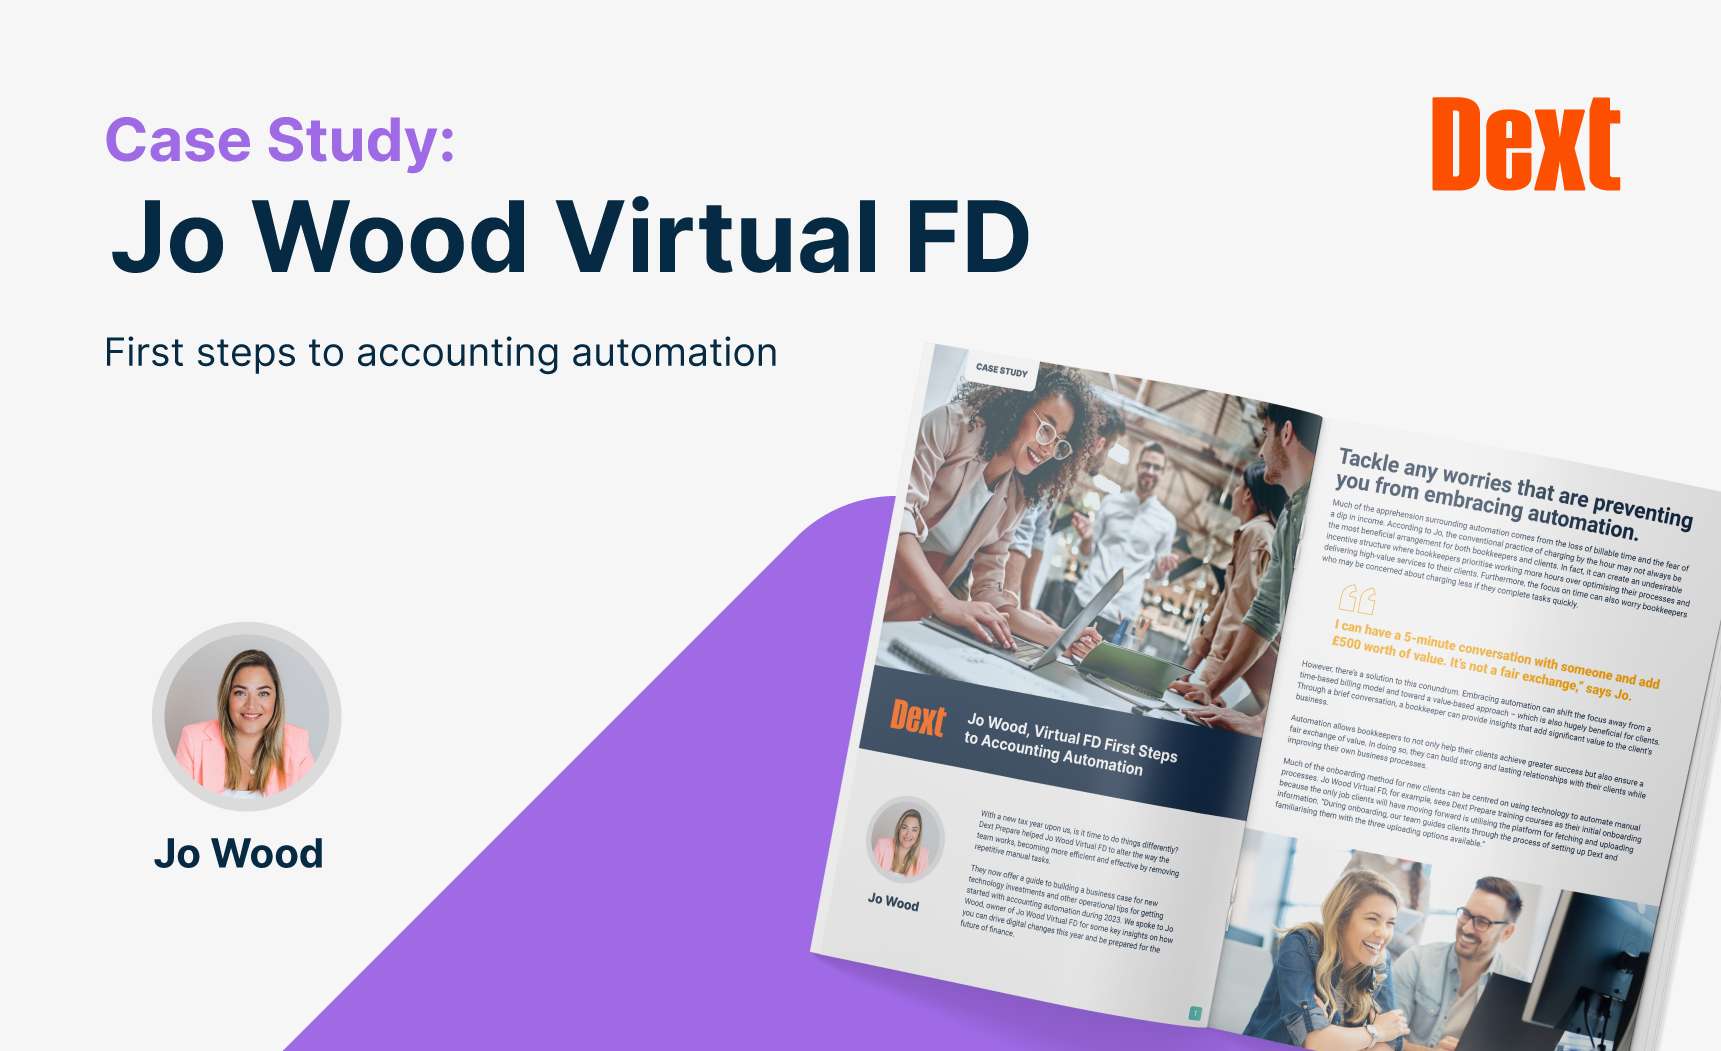 Jo Wood Virtual FD’s First Steps to Accounting Automation